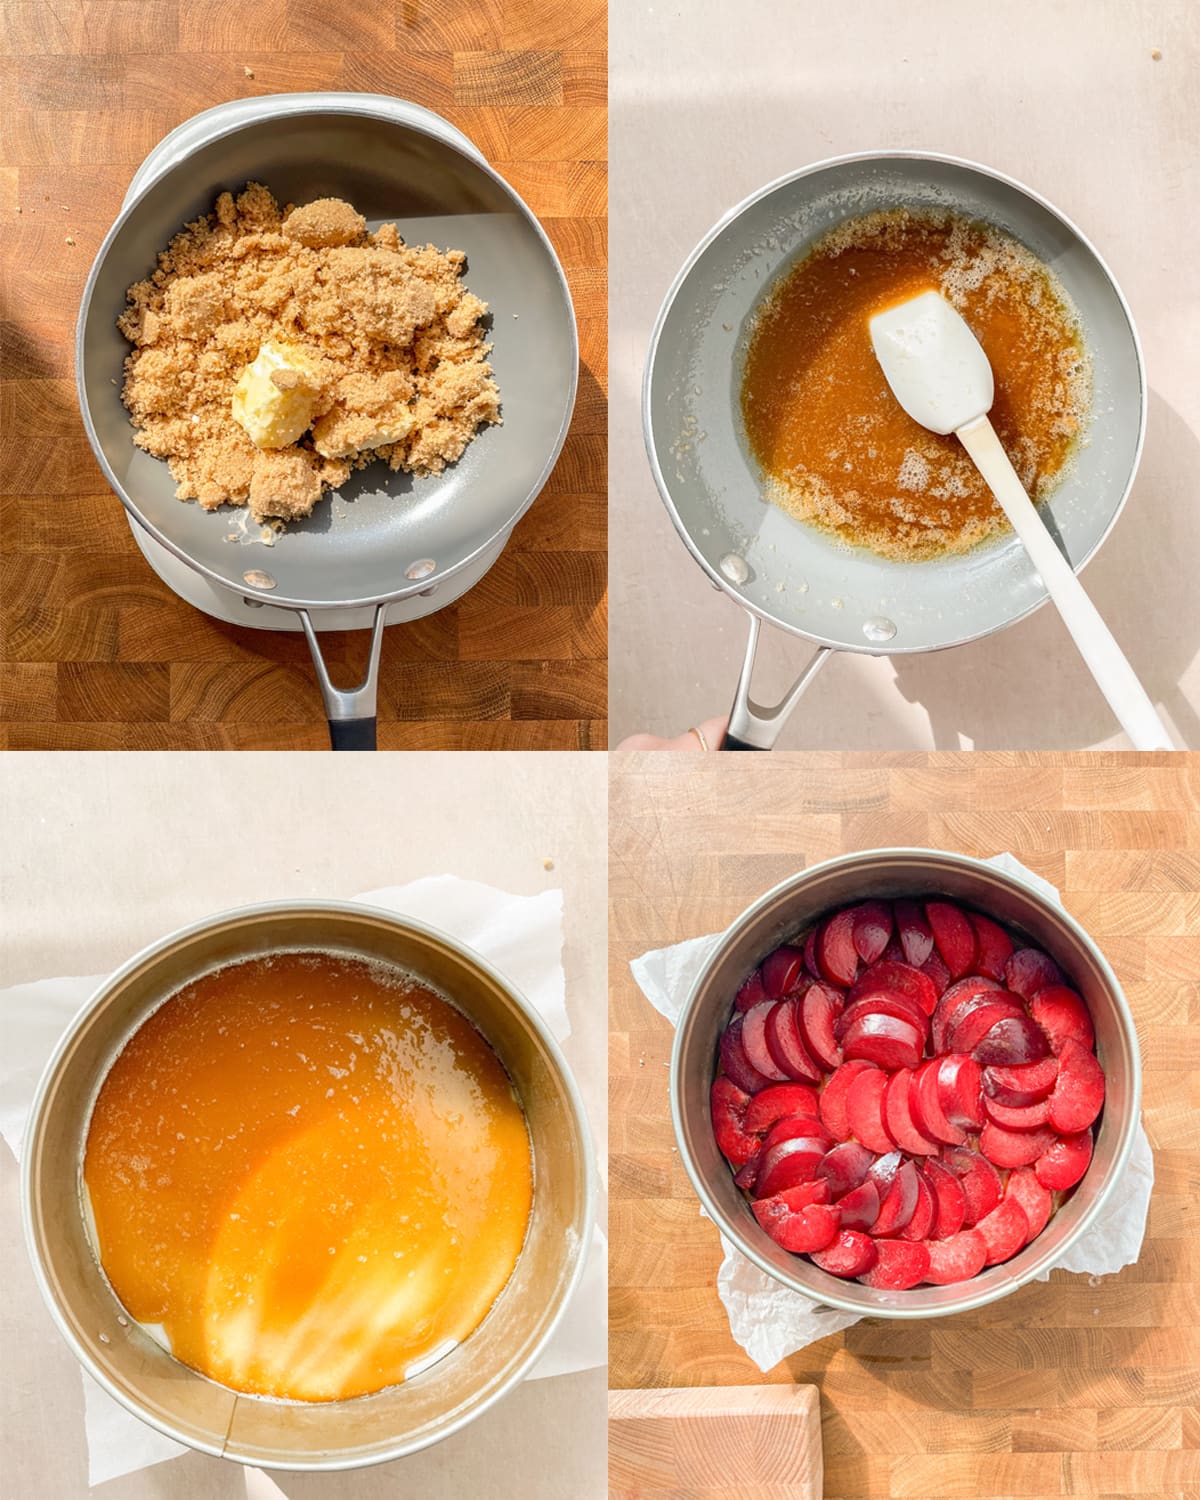 Process images for how to make the base caramel and arrange the plums for an upside down plum cake. 